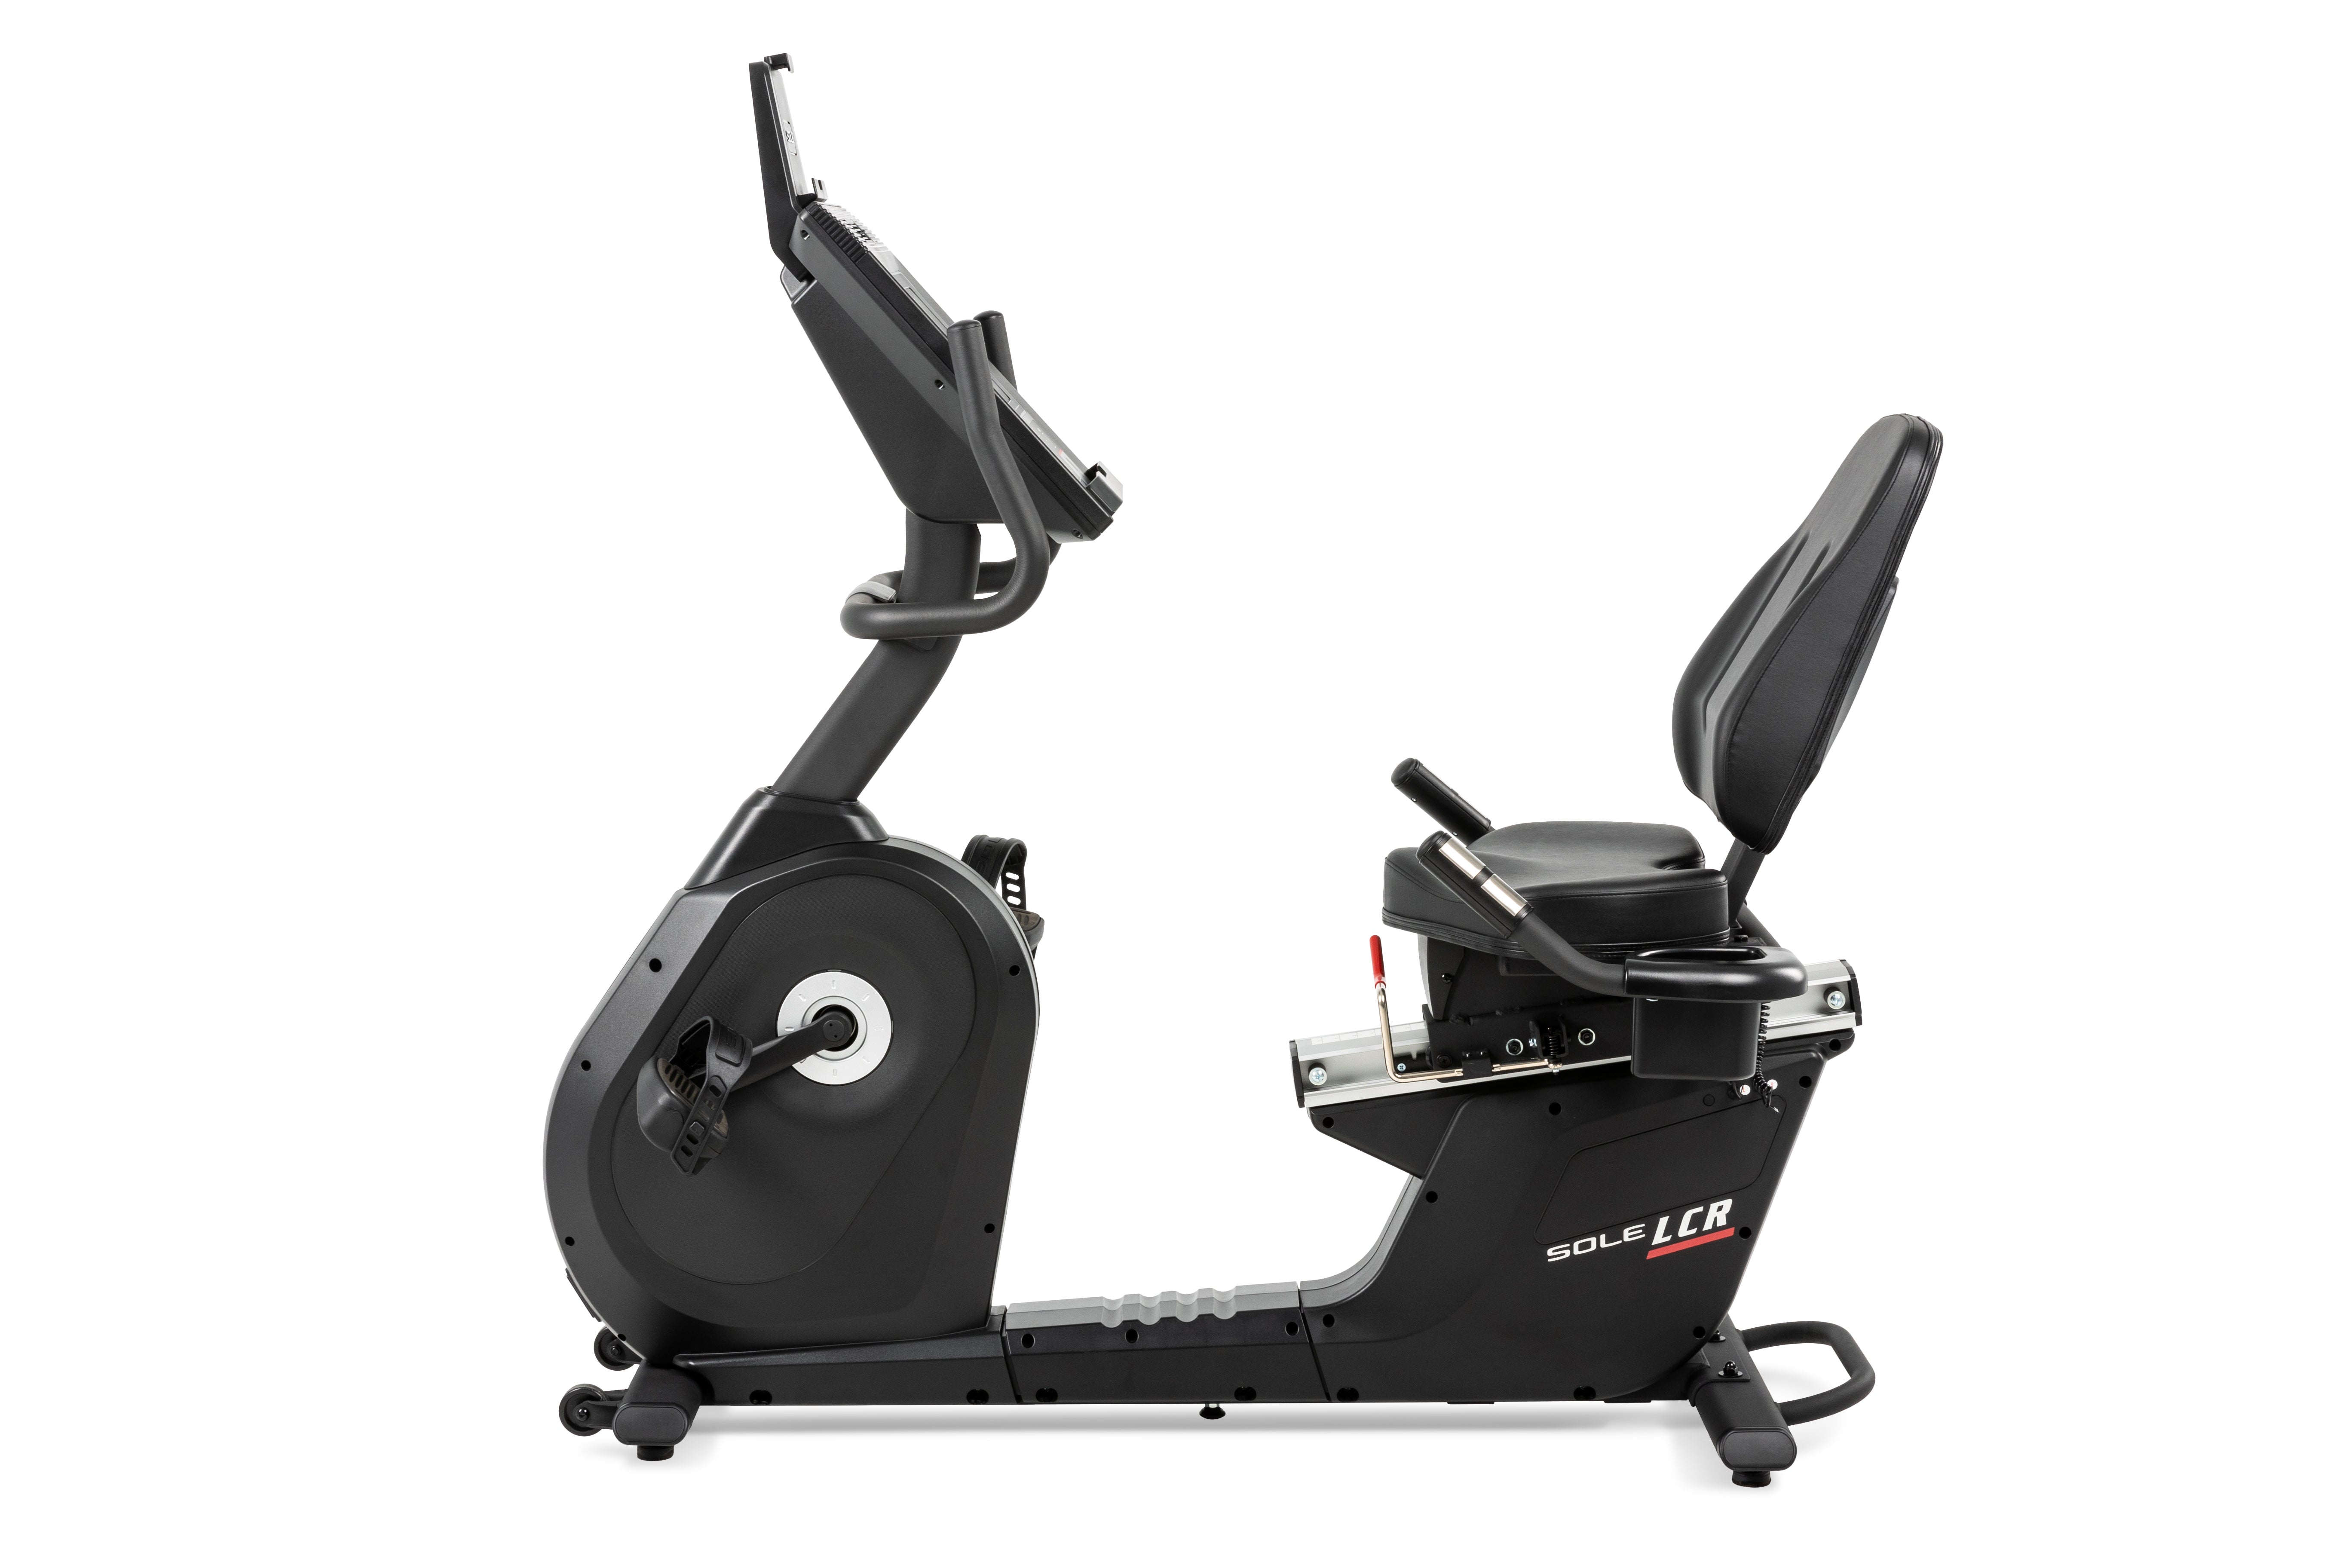 SOLE LCR Exercise Bike